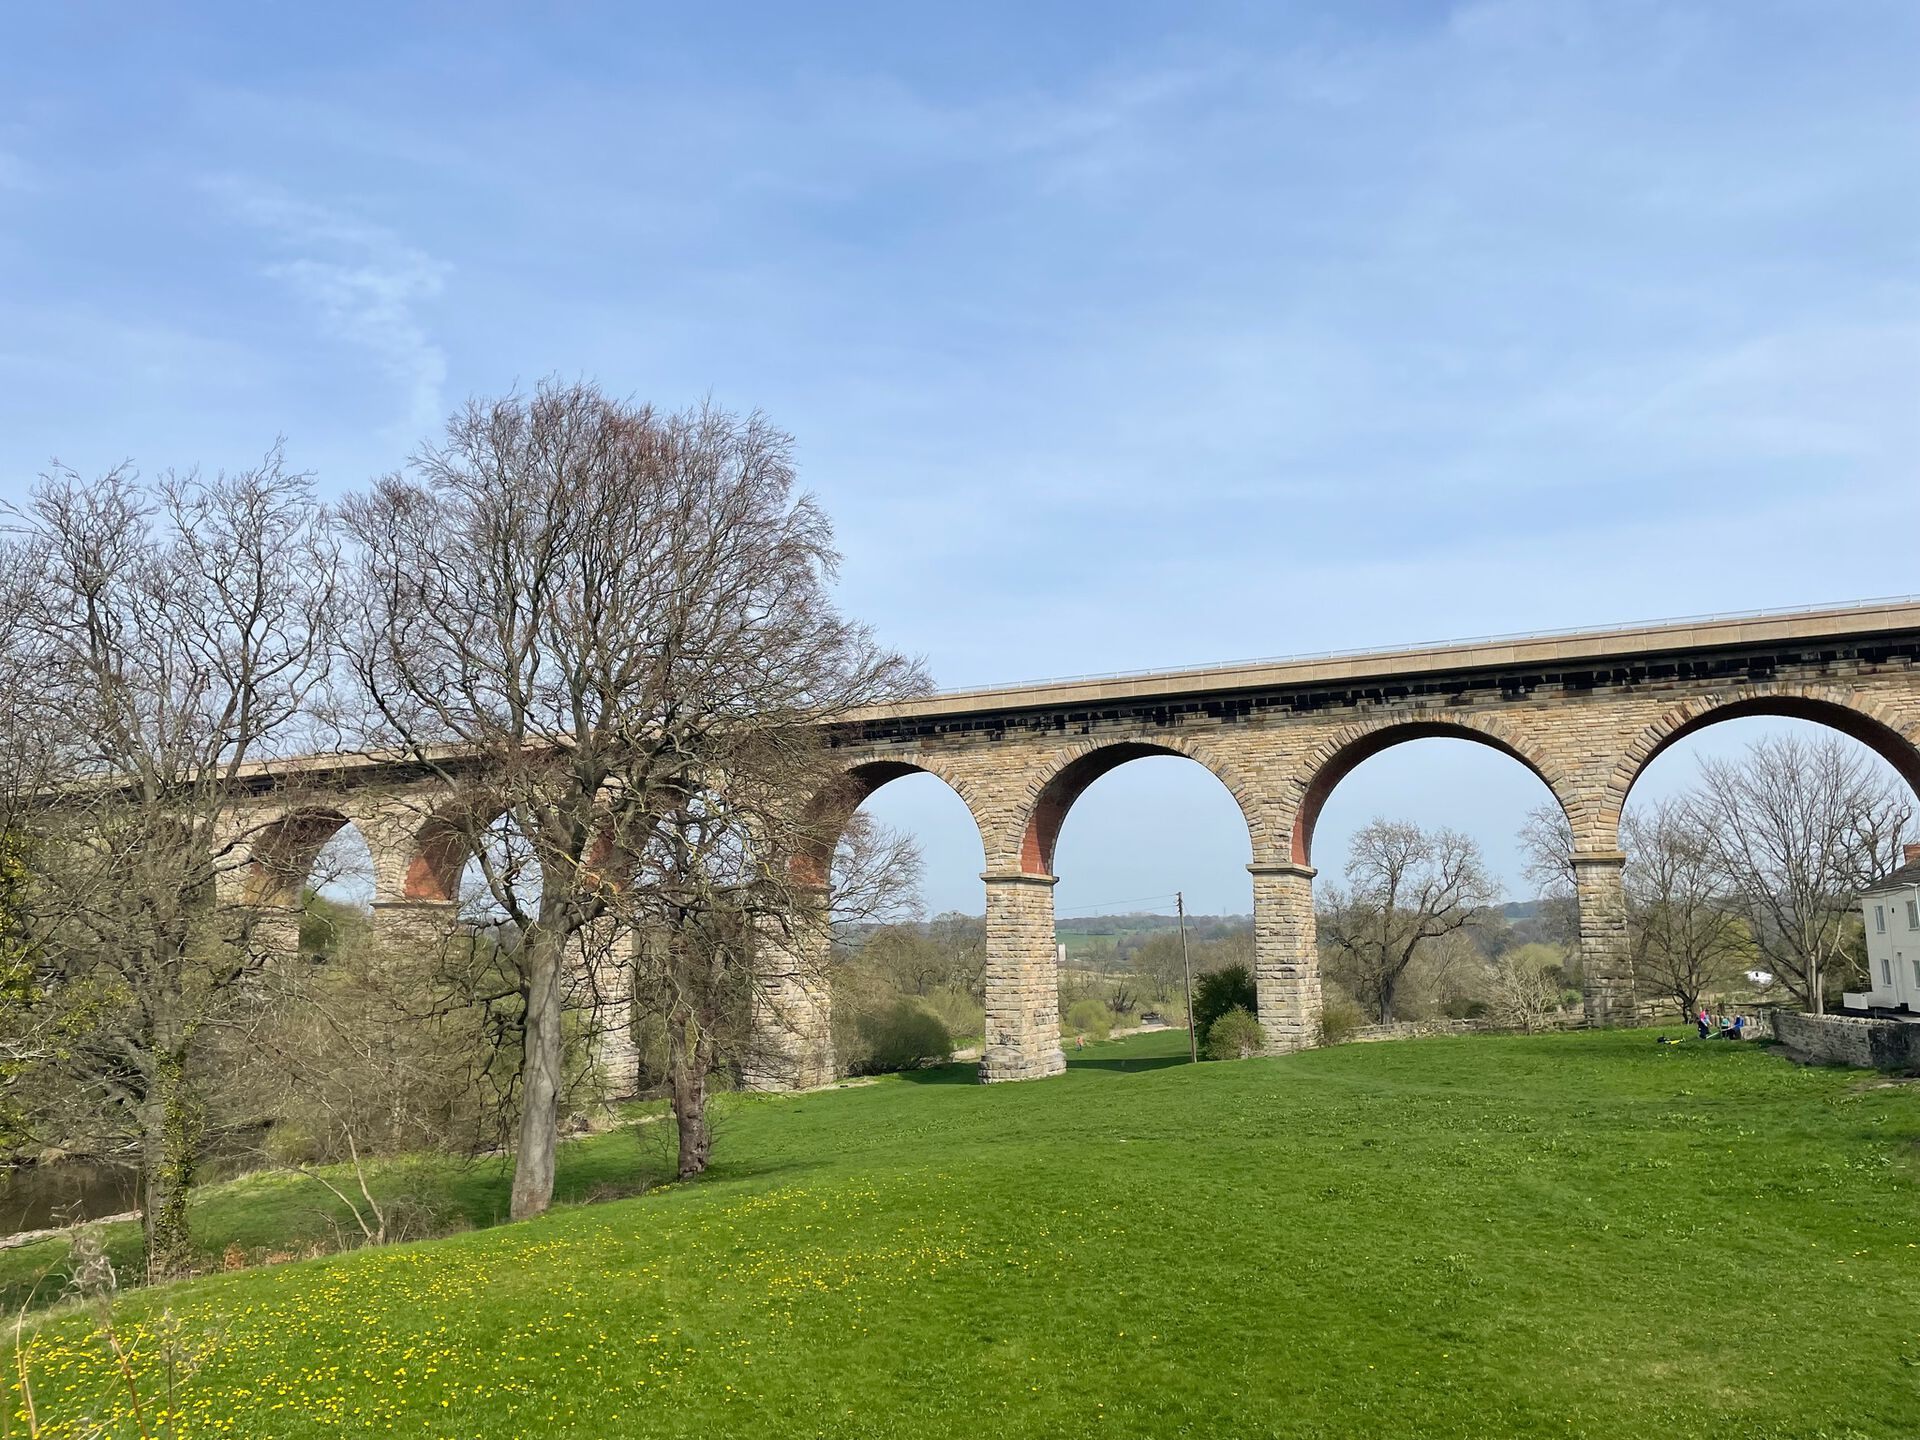 The modern viaduct, originally built for rail, repurposed for a while as a walking path, now carries the A689